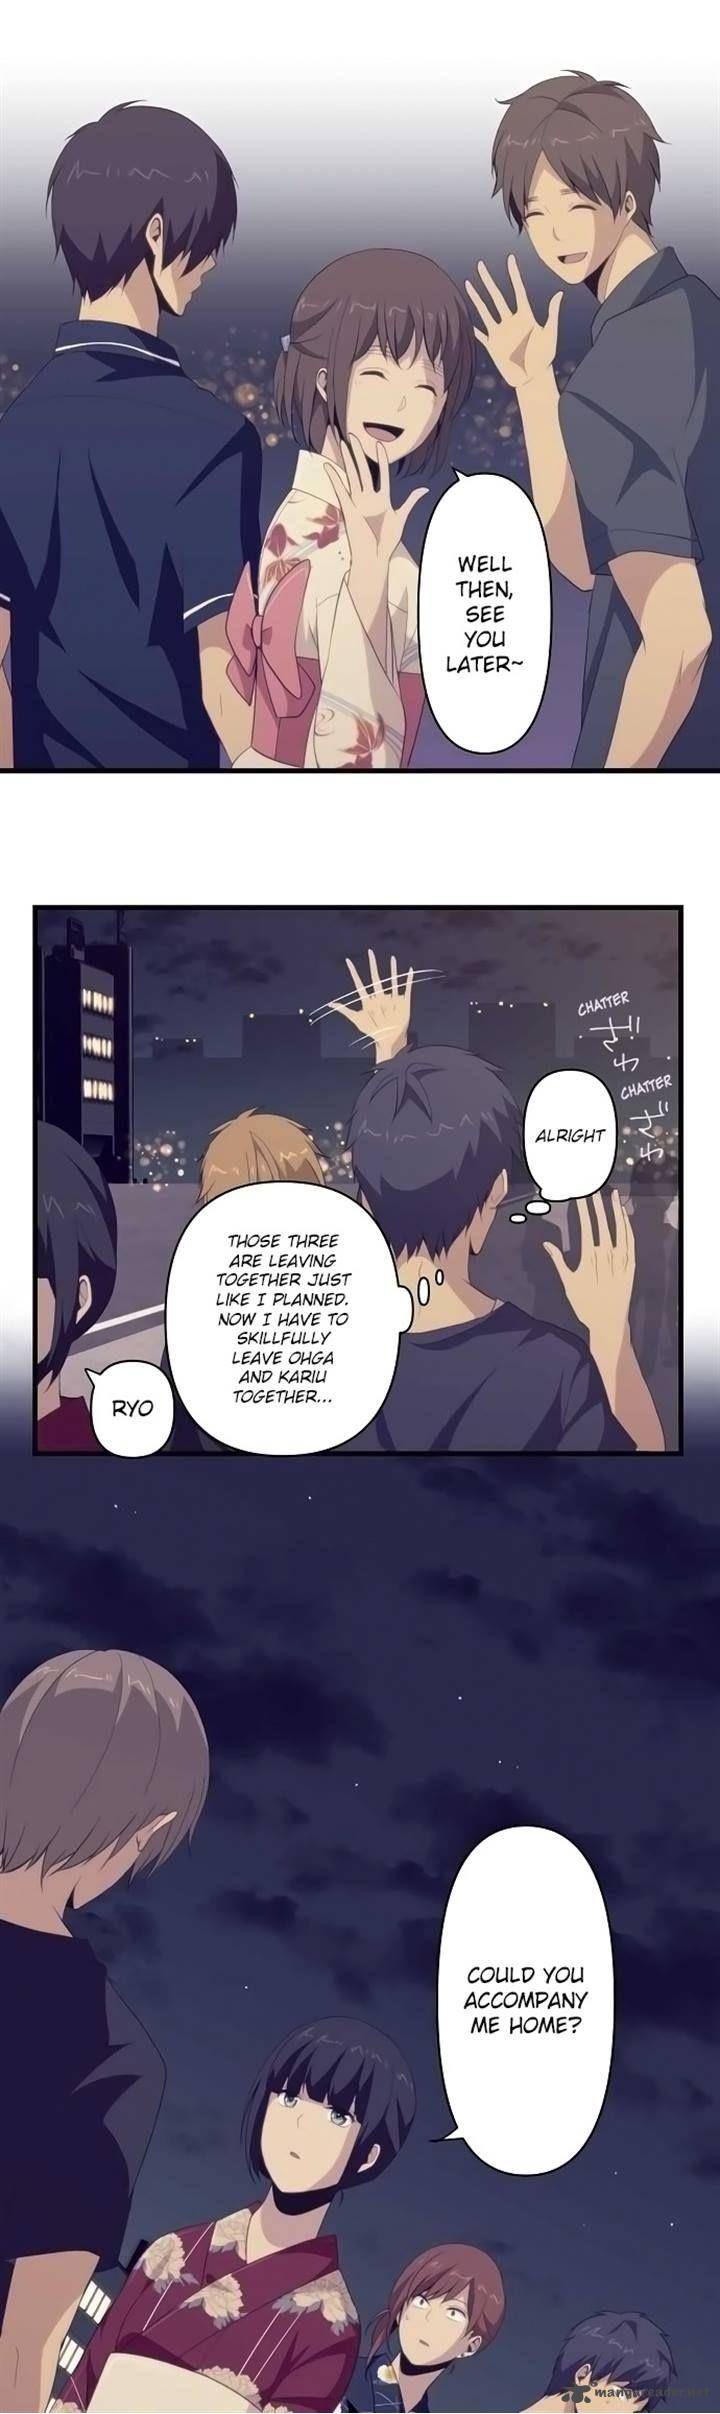 relife_104_17